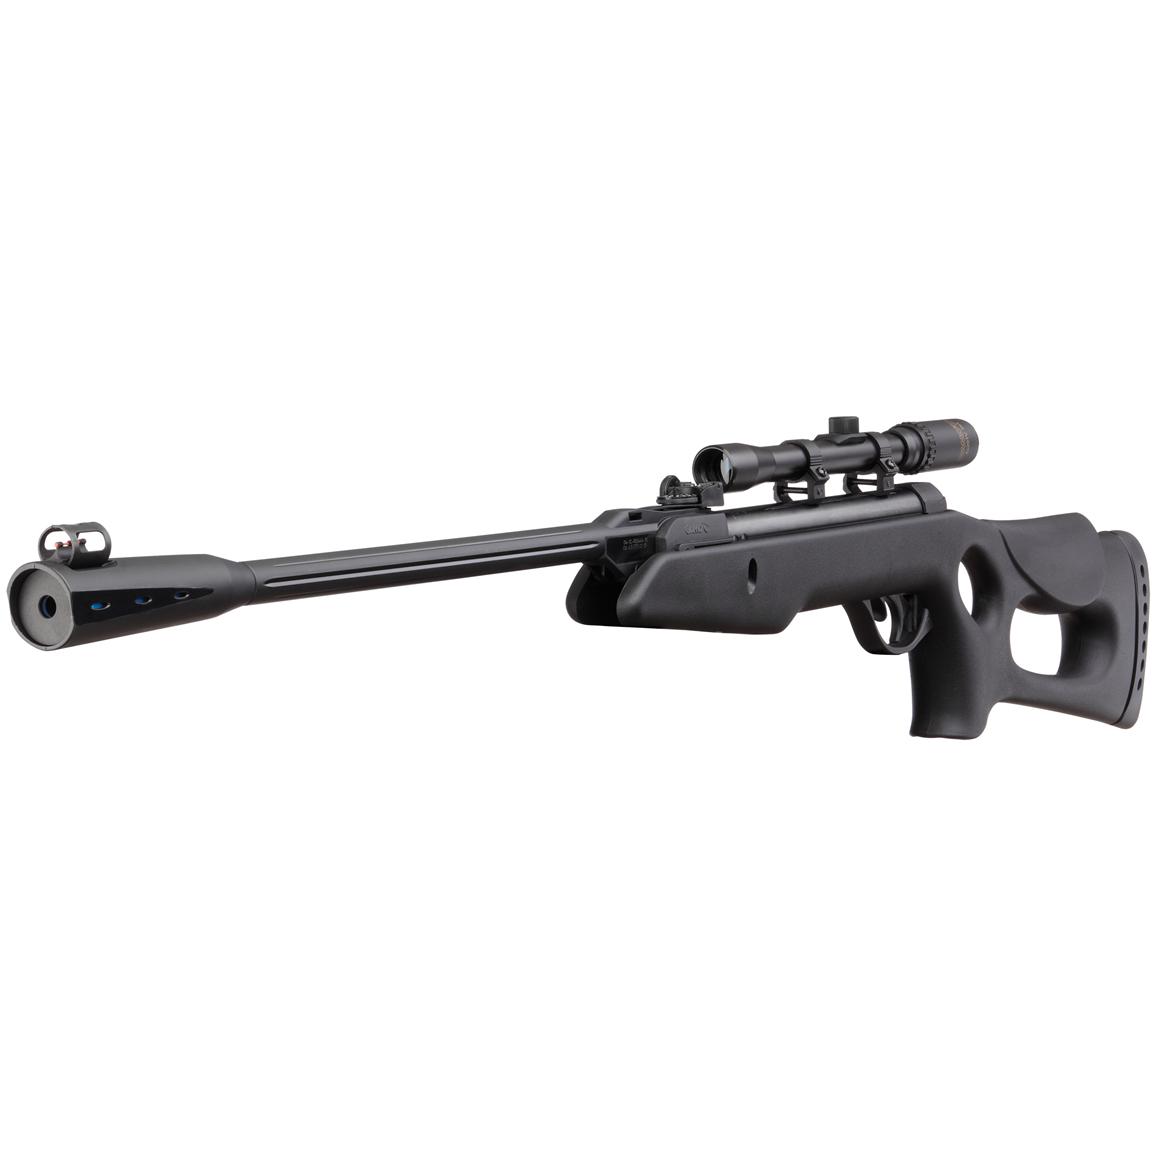  Gamo   Recon Whisper  Air Rifle  with 4x20mm Scope 584622 